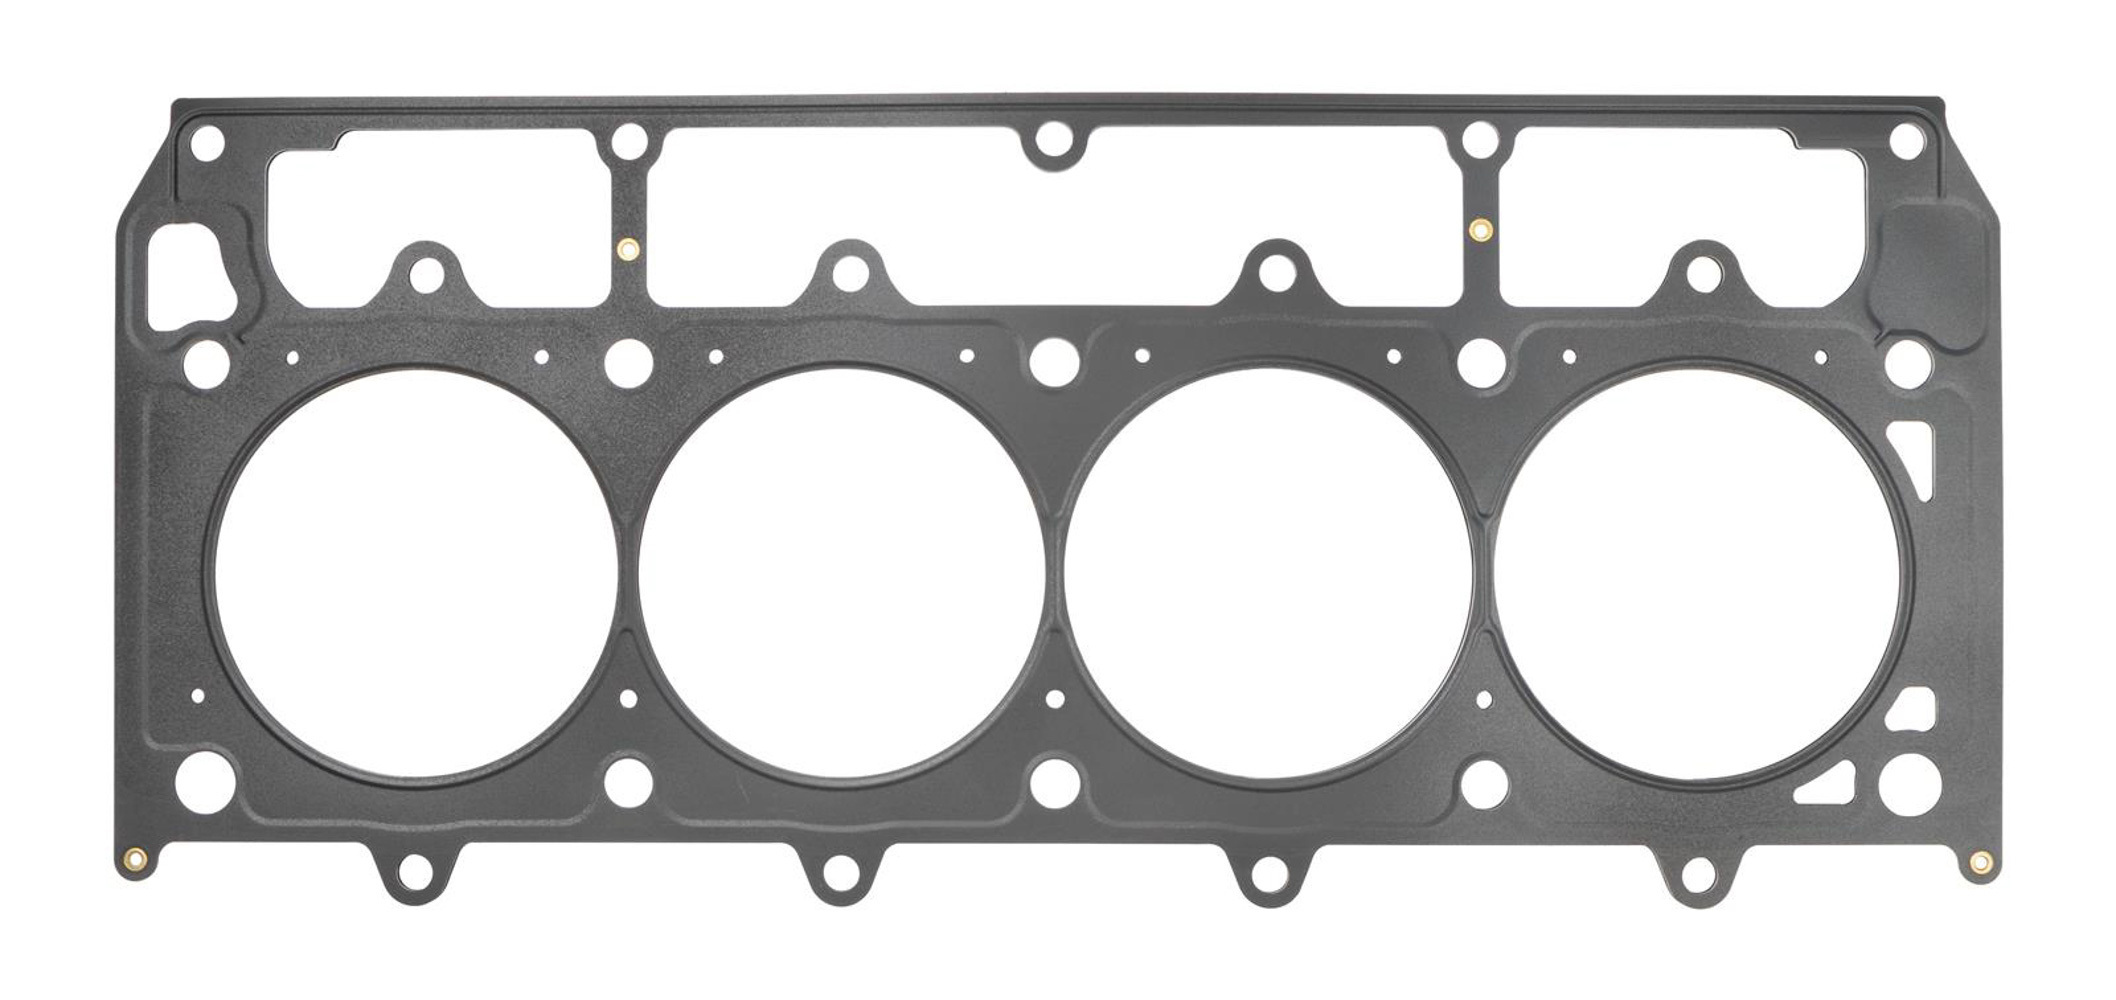 SCE Gaskets M192051L - Cylinder Head Gasket, MLS Spartan, 4.201 in Bore, 0.051 in Compression Thickness, Multi-Layer Steel, Driver Side, GM LS-Series, Each